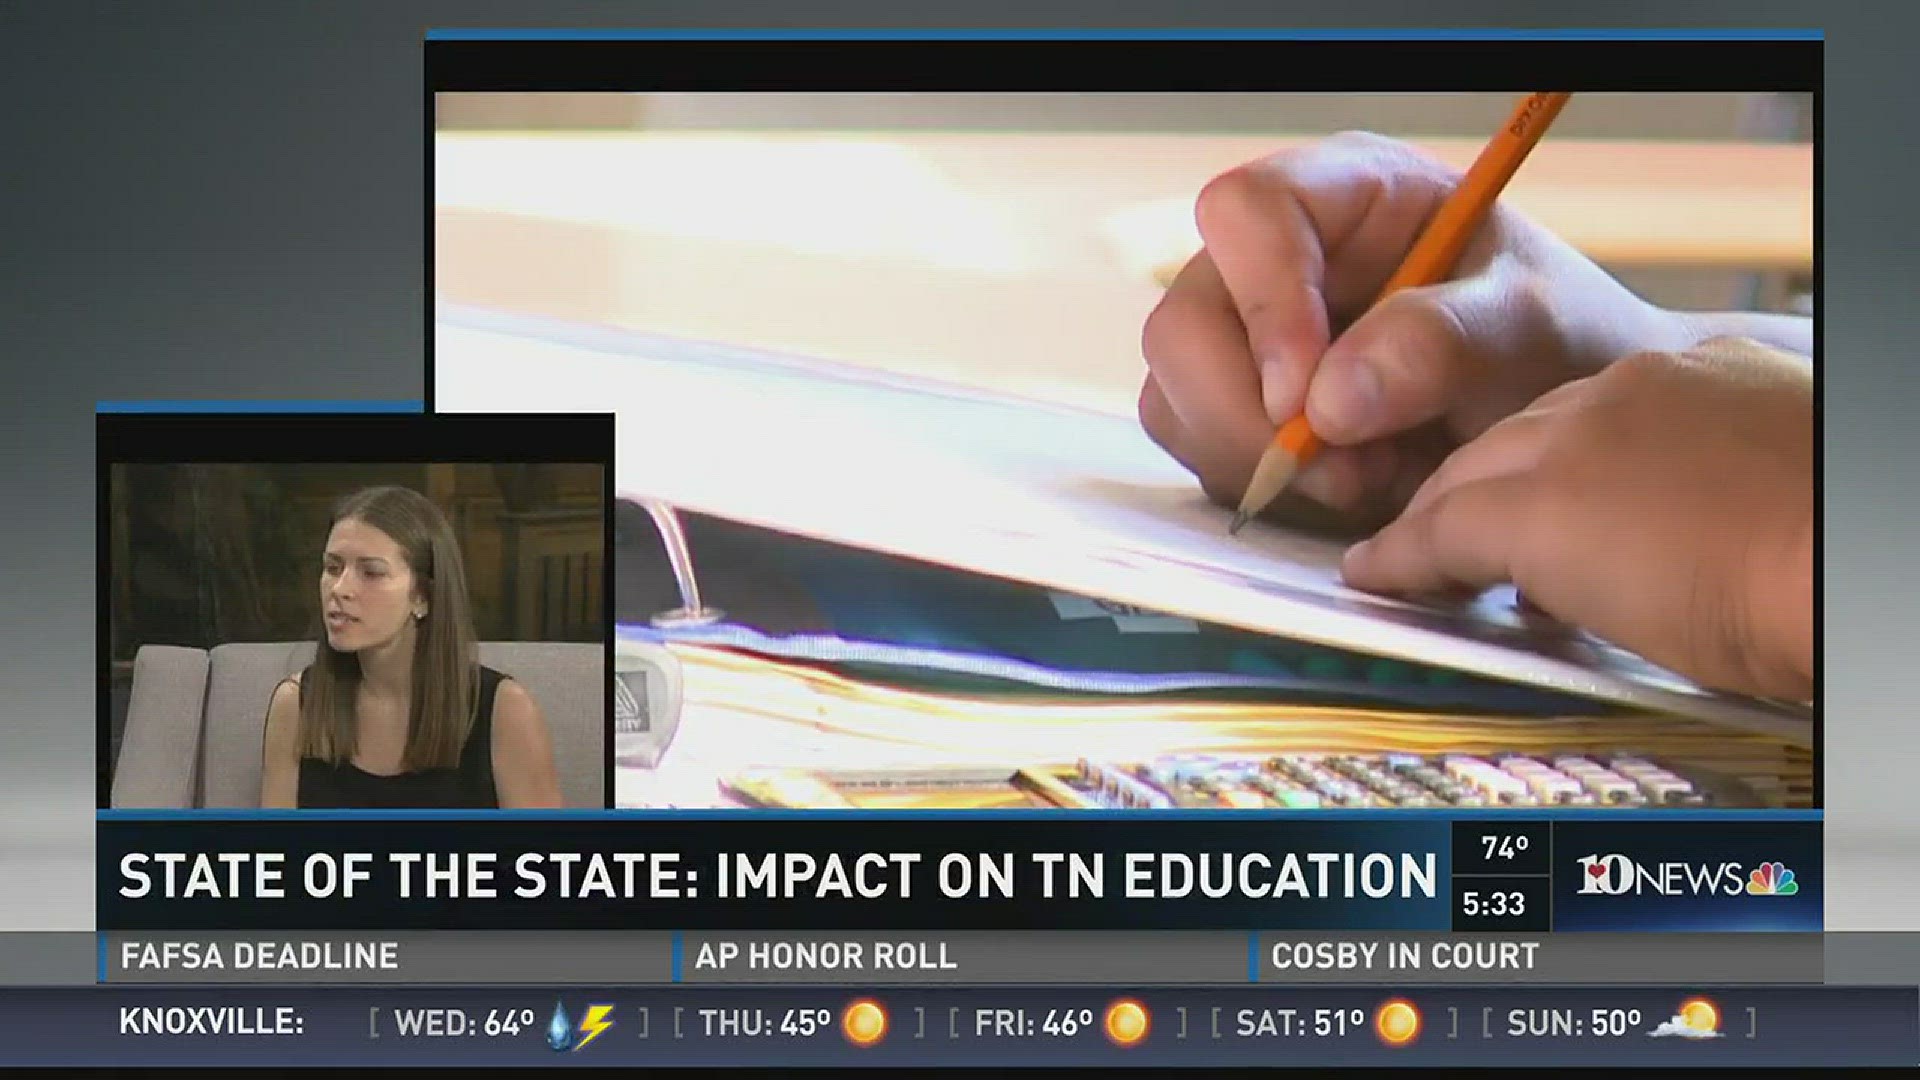 Gov. Bill Haslam�s proposed new budget includes millions more for higher education. Krissy DeAlejandro, executive director of tnAchieves, and Ted Lewis, vice president of academic affairs at Pellissippi State Community College, talk about the budget and h